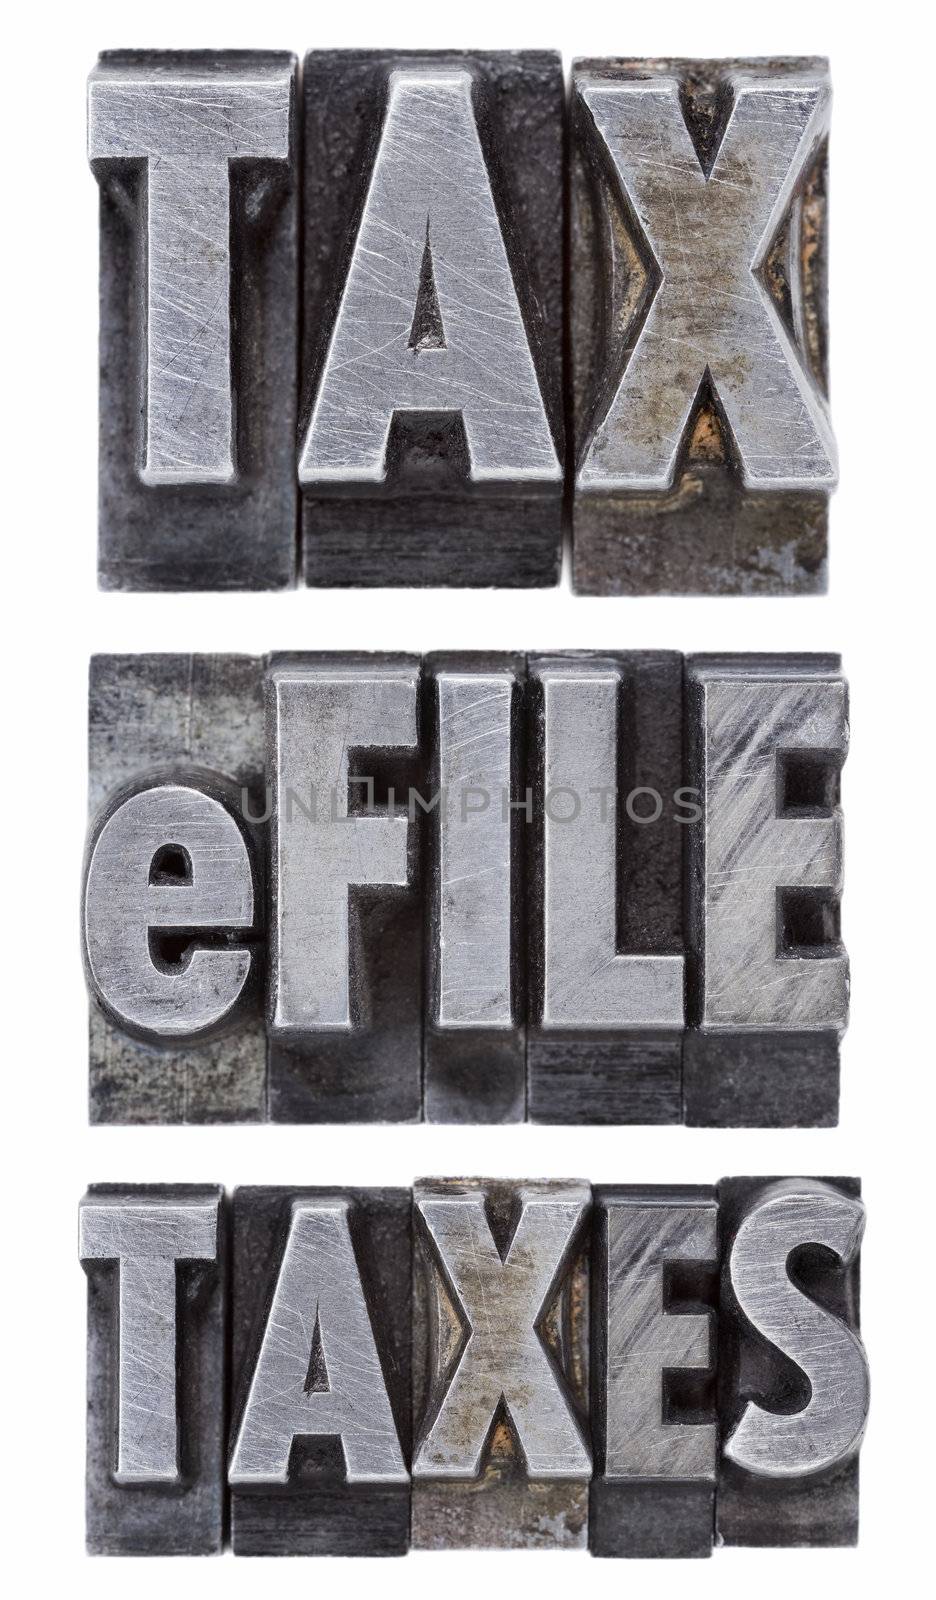 e-file taxes - tax concept - a collage of isolated words in vintage grunge metal letterpress type